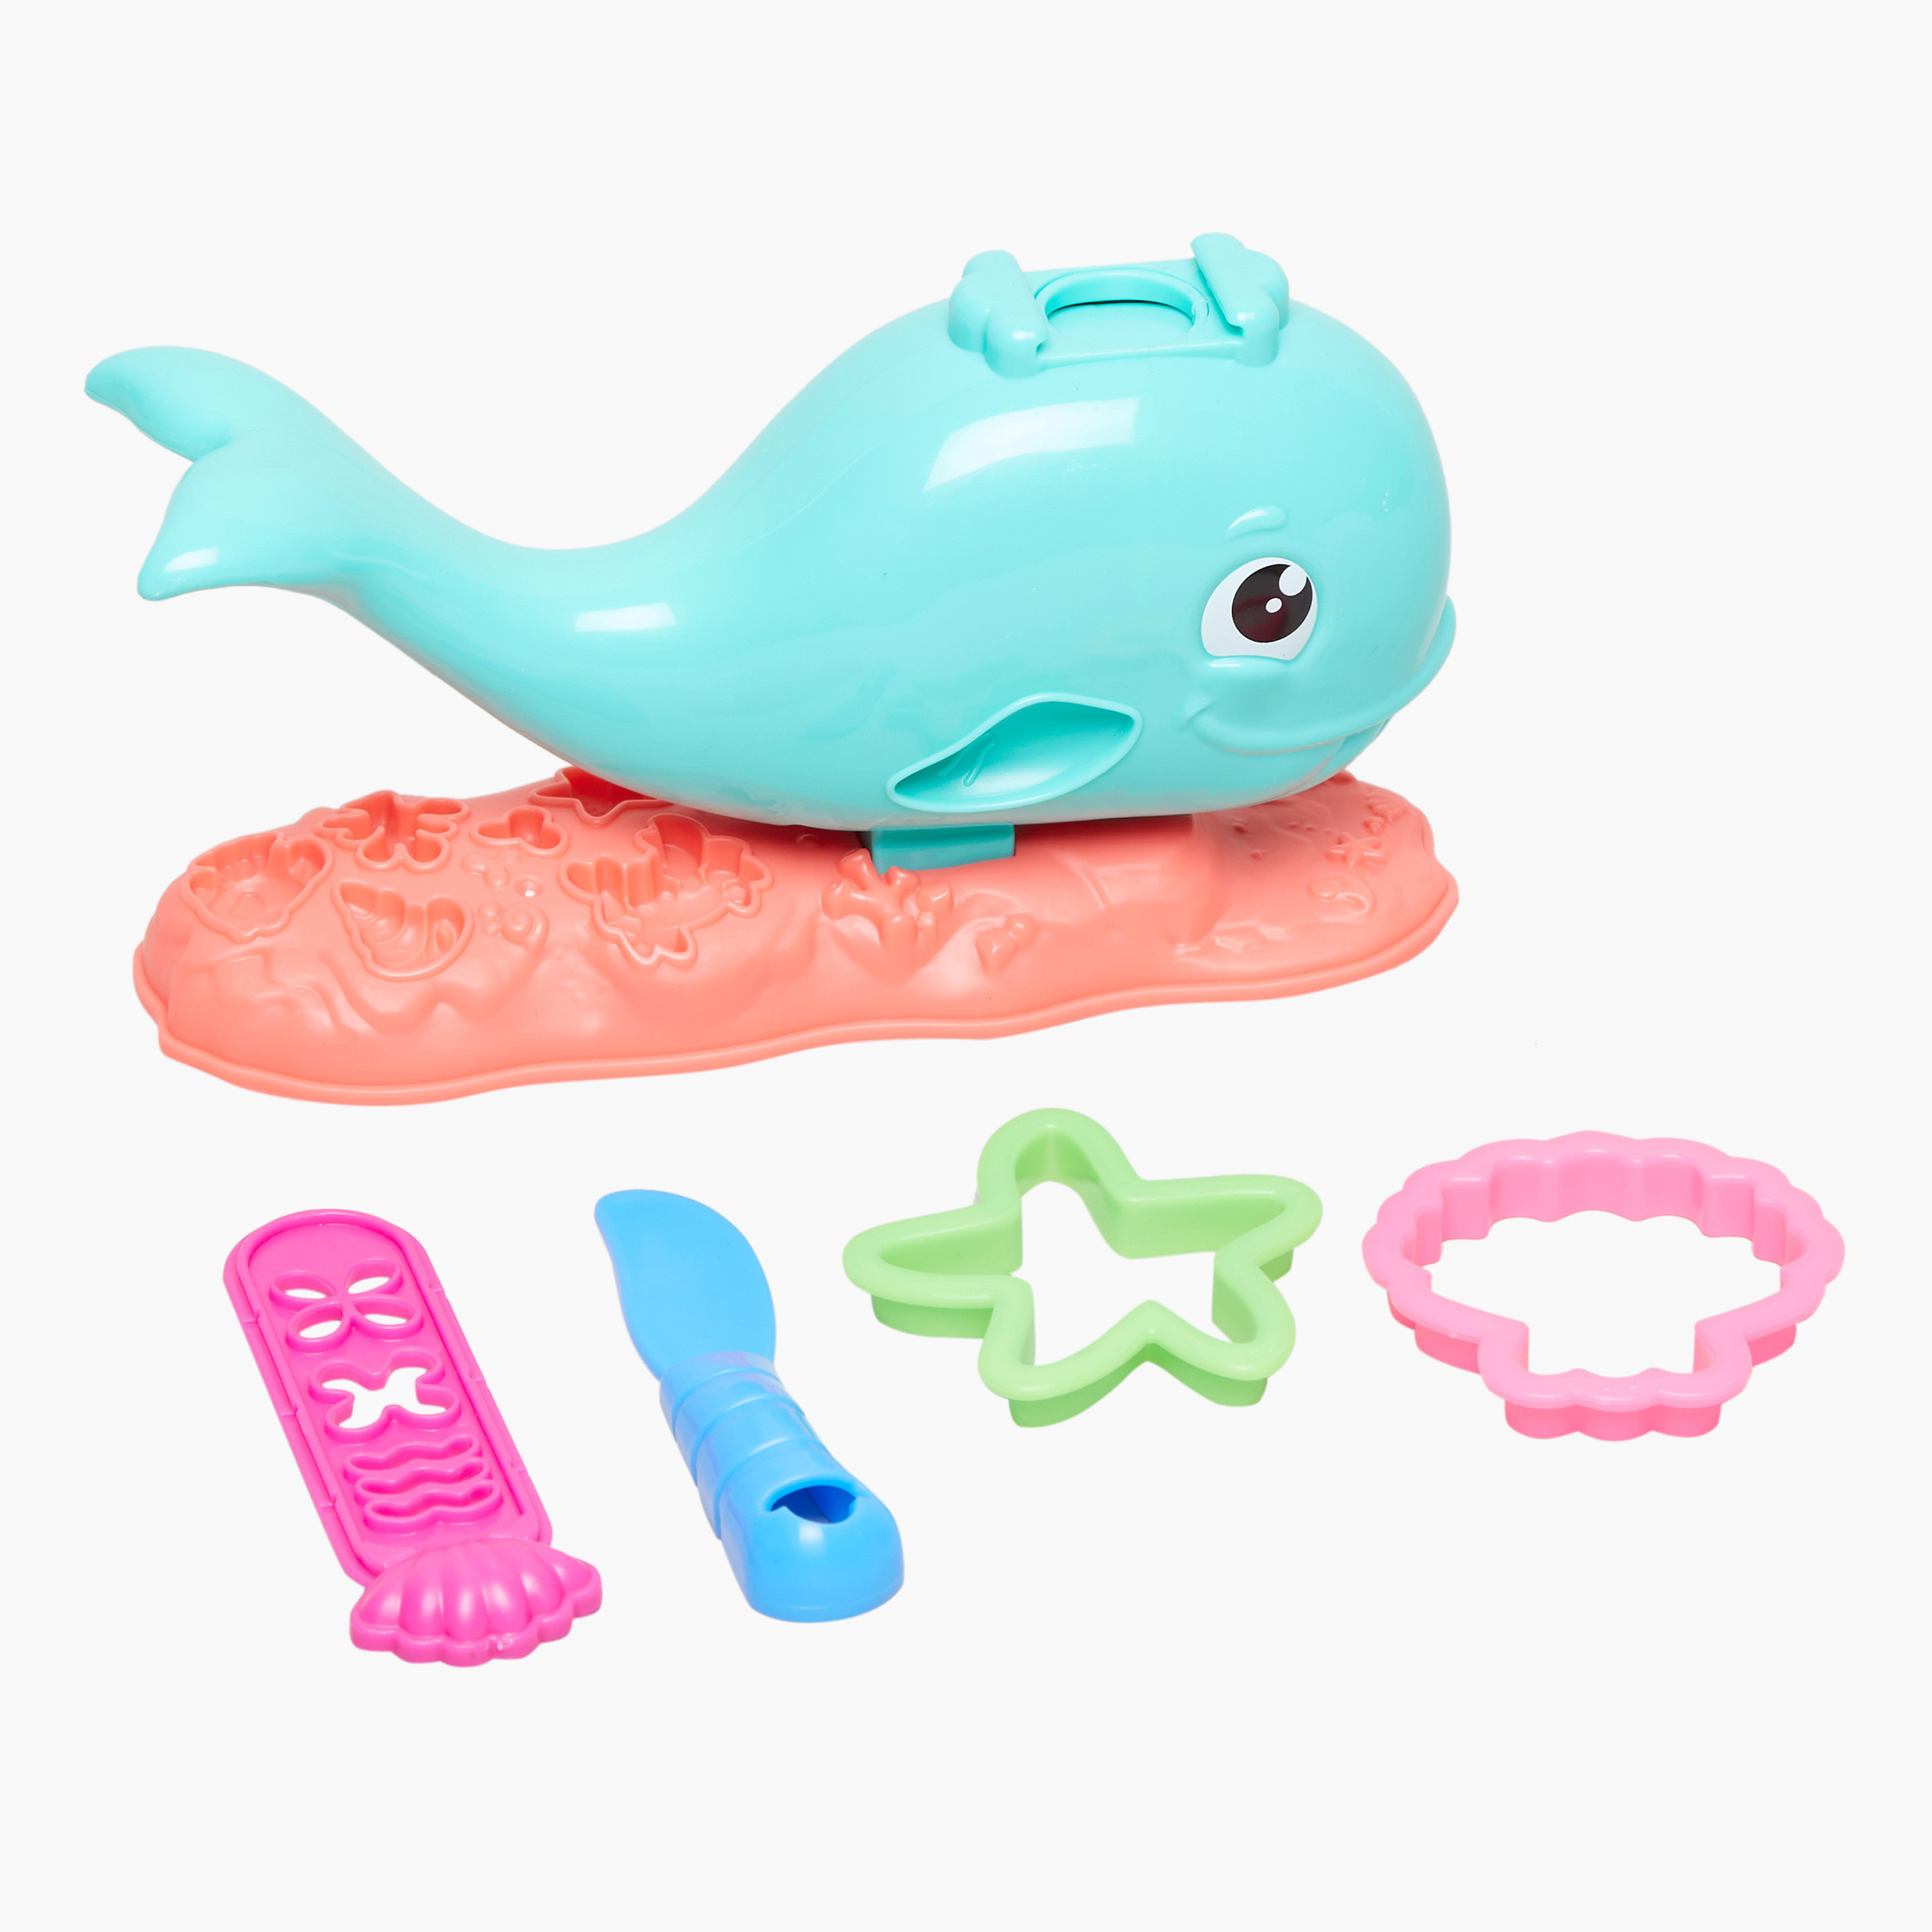 Shop Hasbro Play Doh Wavy the Whale Online | Centrepoint Qatar